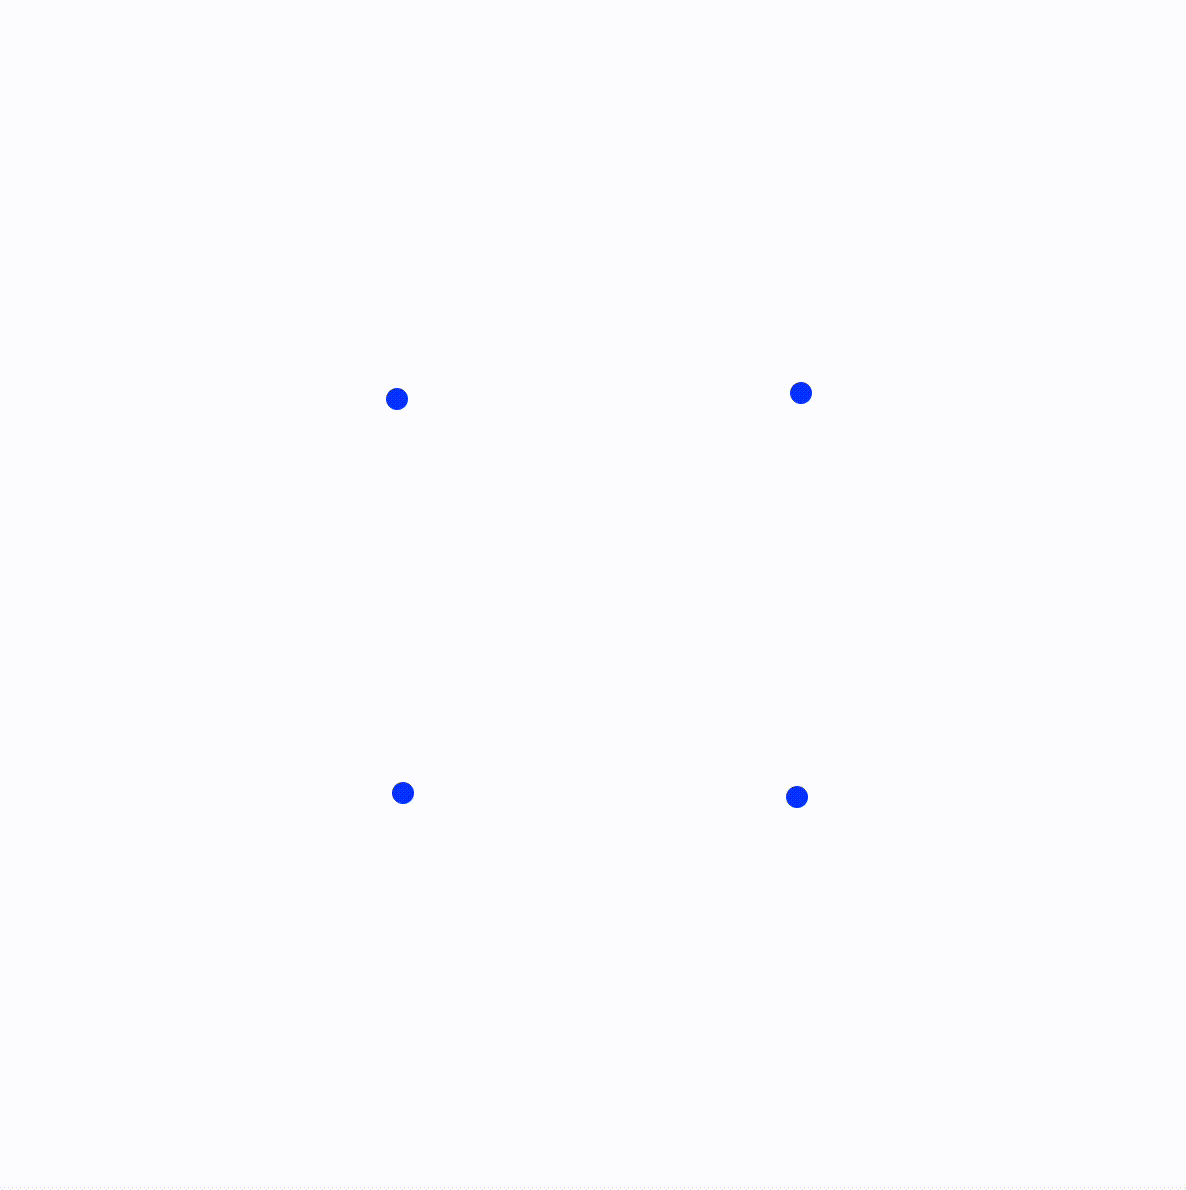 Four small blue particles which bounce up and down, on the four edges of the window. They bounce to the same height every time.